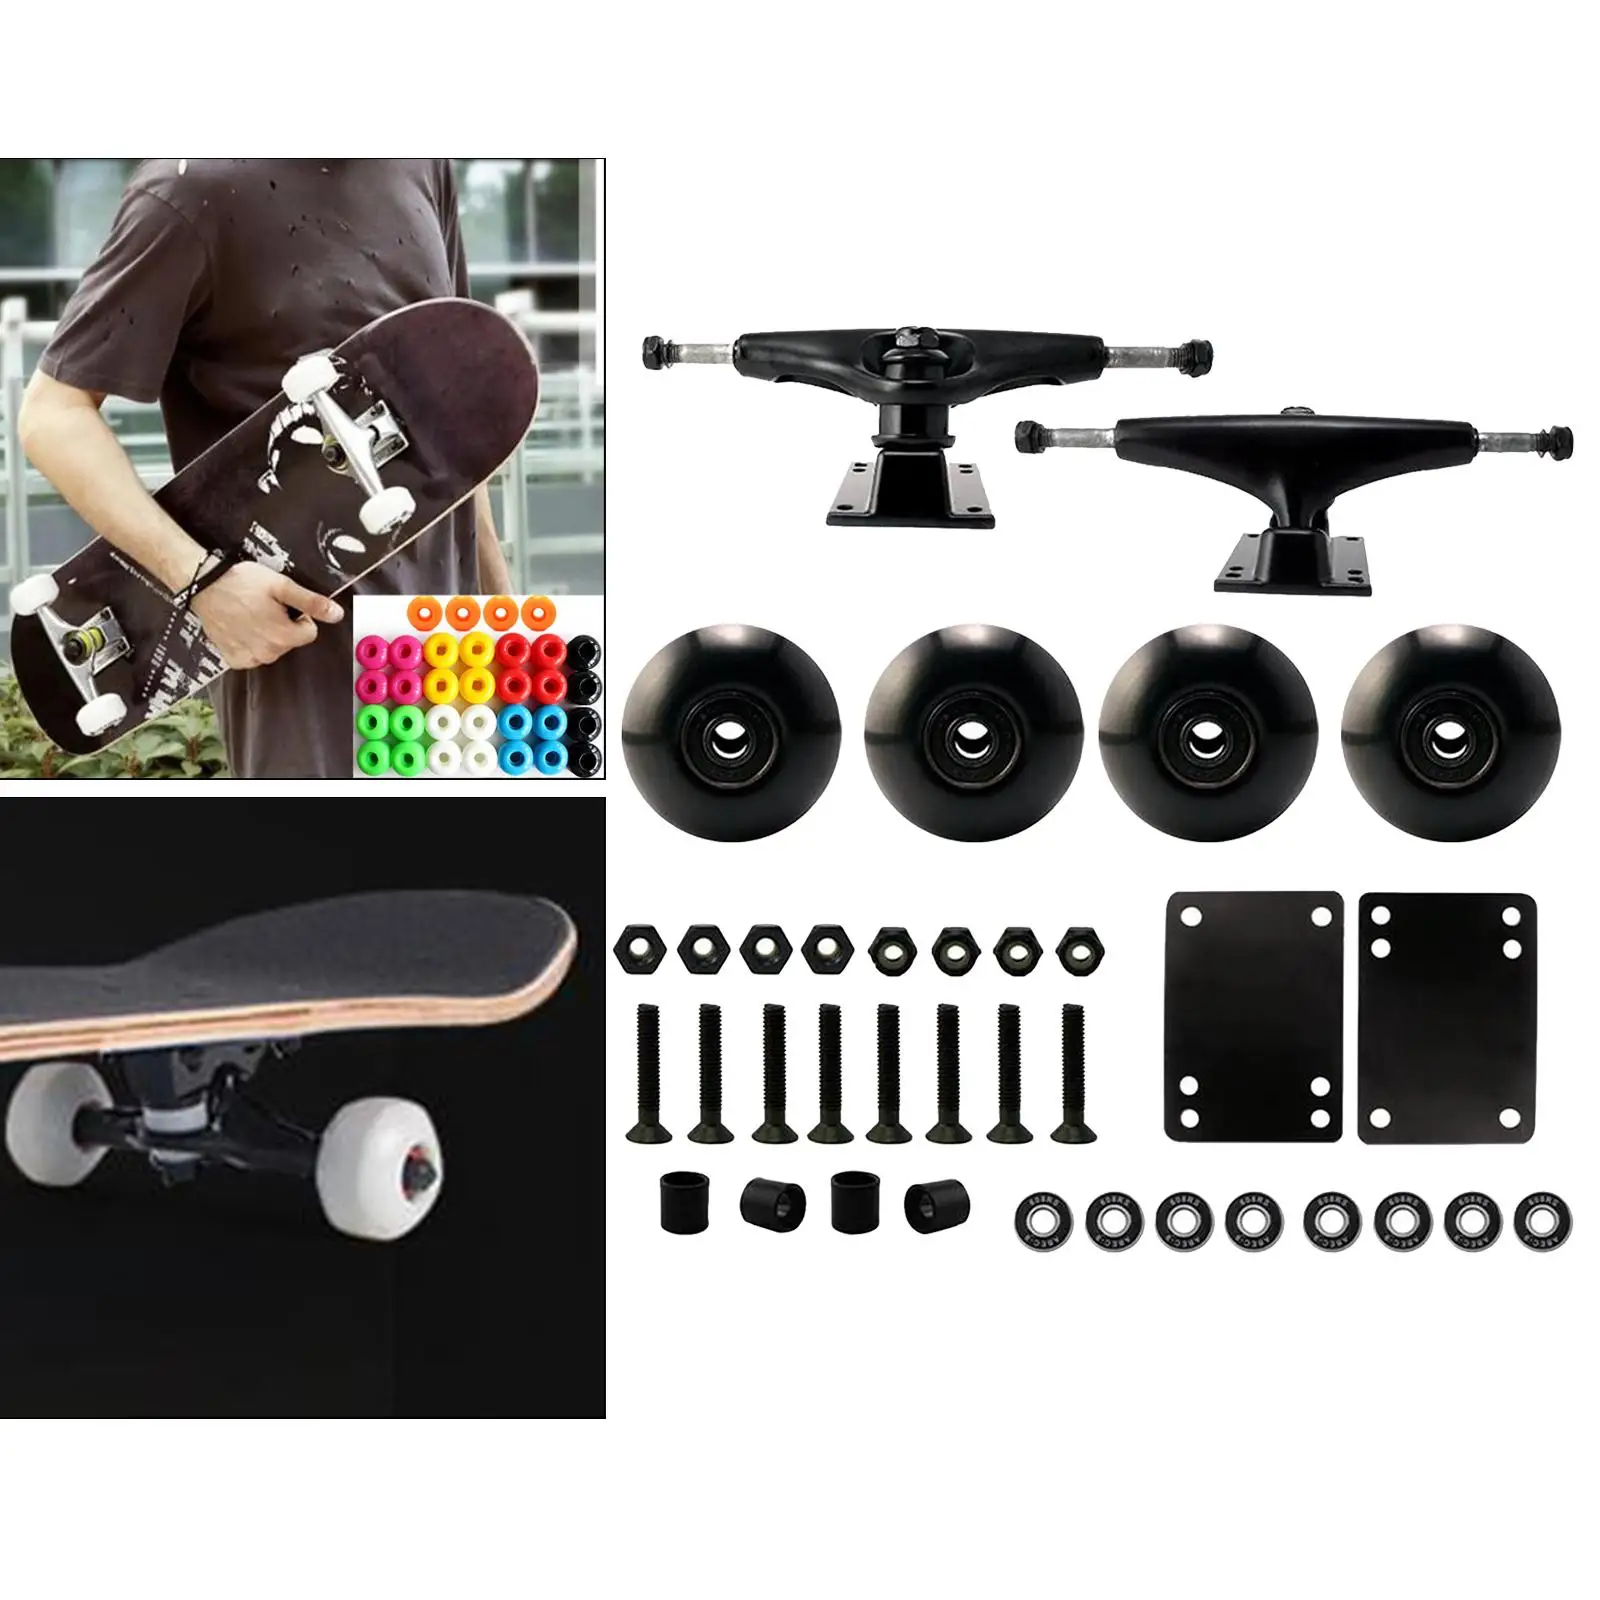 Skateboard Package 5 Inch Trucks with 52mm Wheels + Components, Aluminum Trucks 5A Hardness Bushions and 6-Hole Baseplates